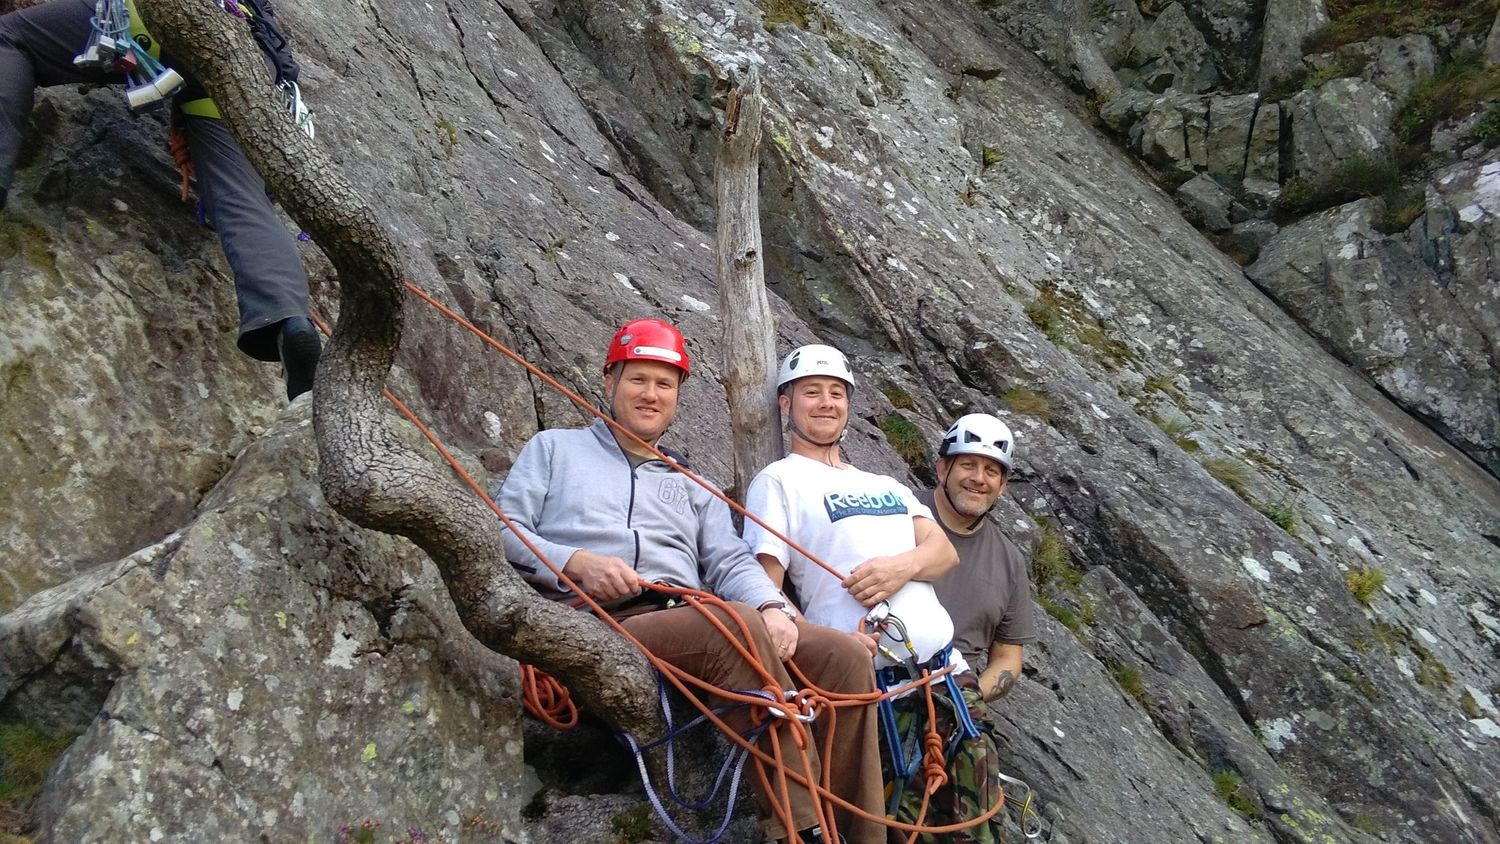  A group of clients belaying at the bottom of a single pitch rock route in the Lake District - Chris Ensoll Mountain Guide 